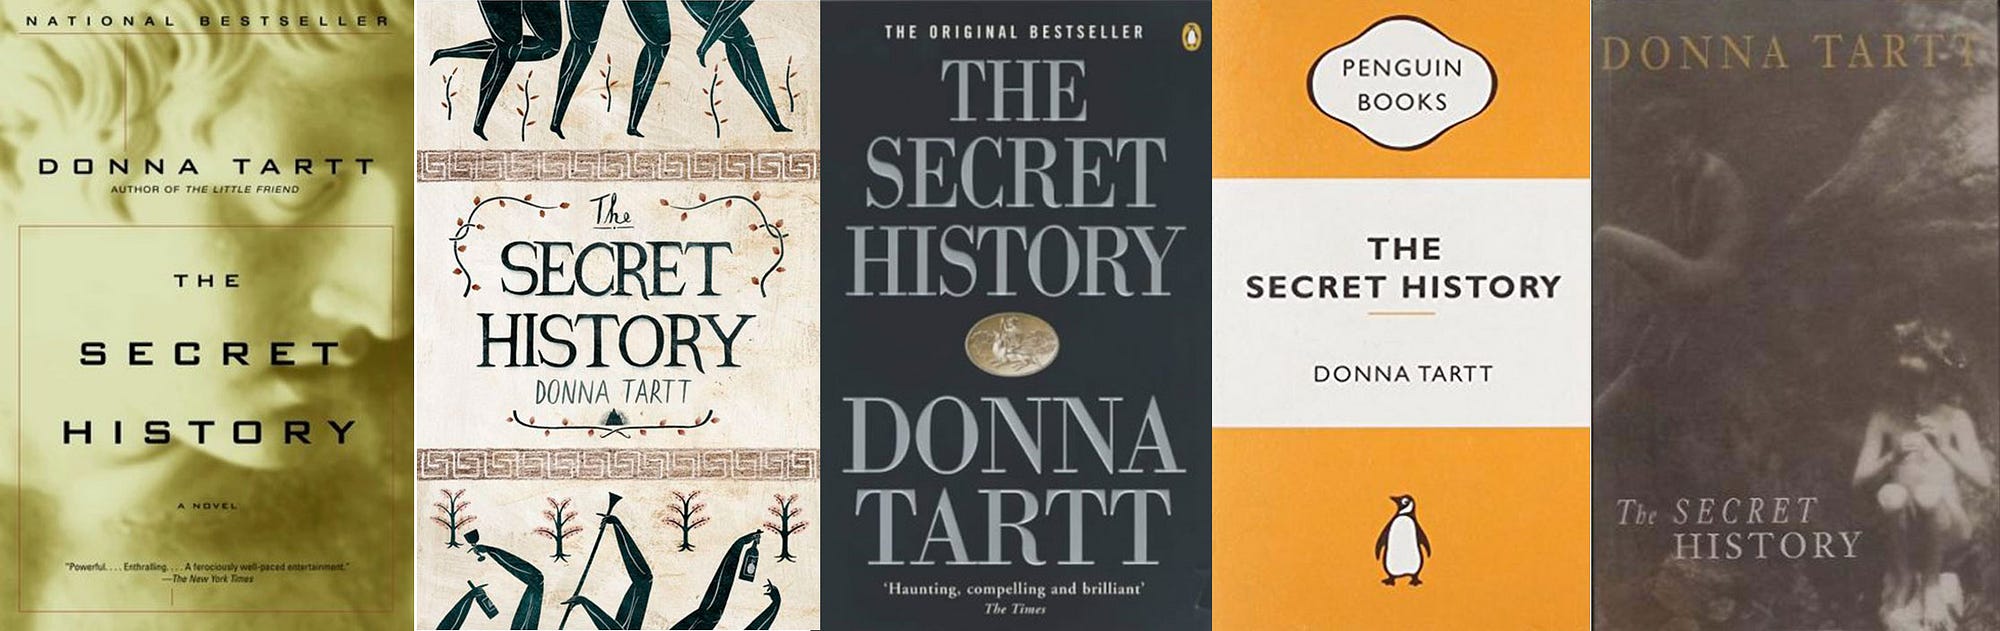 Redesigning The Secret History by Donna Tartt, by David Higdon